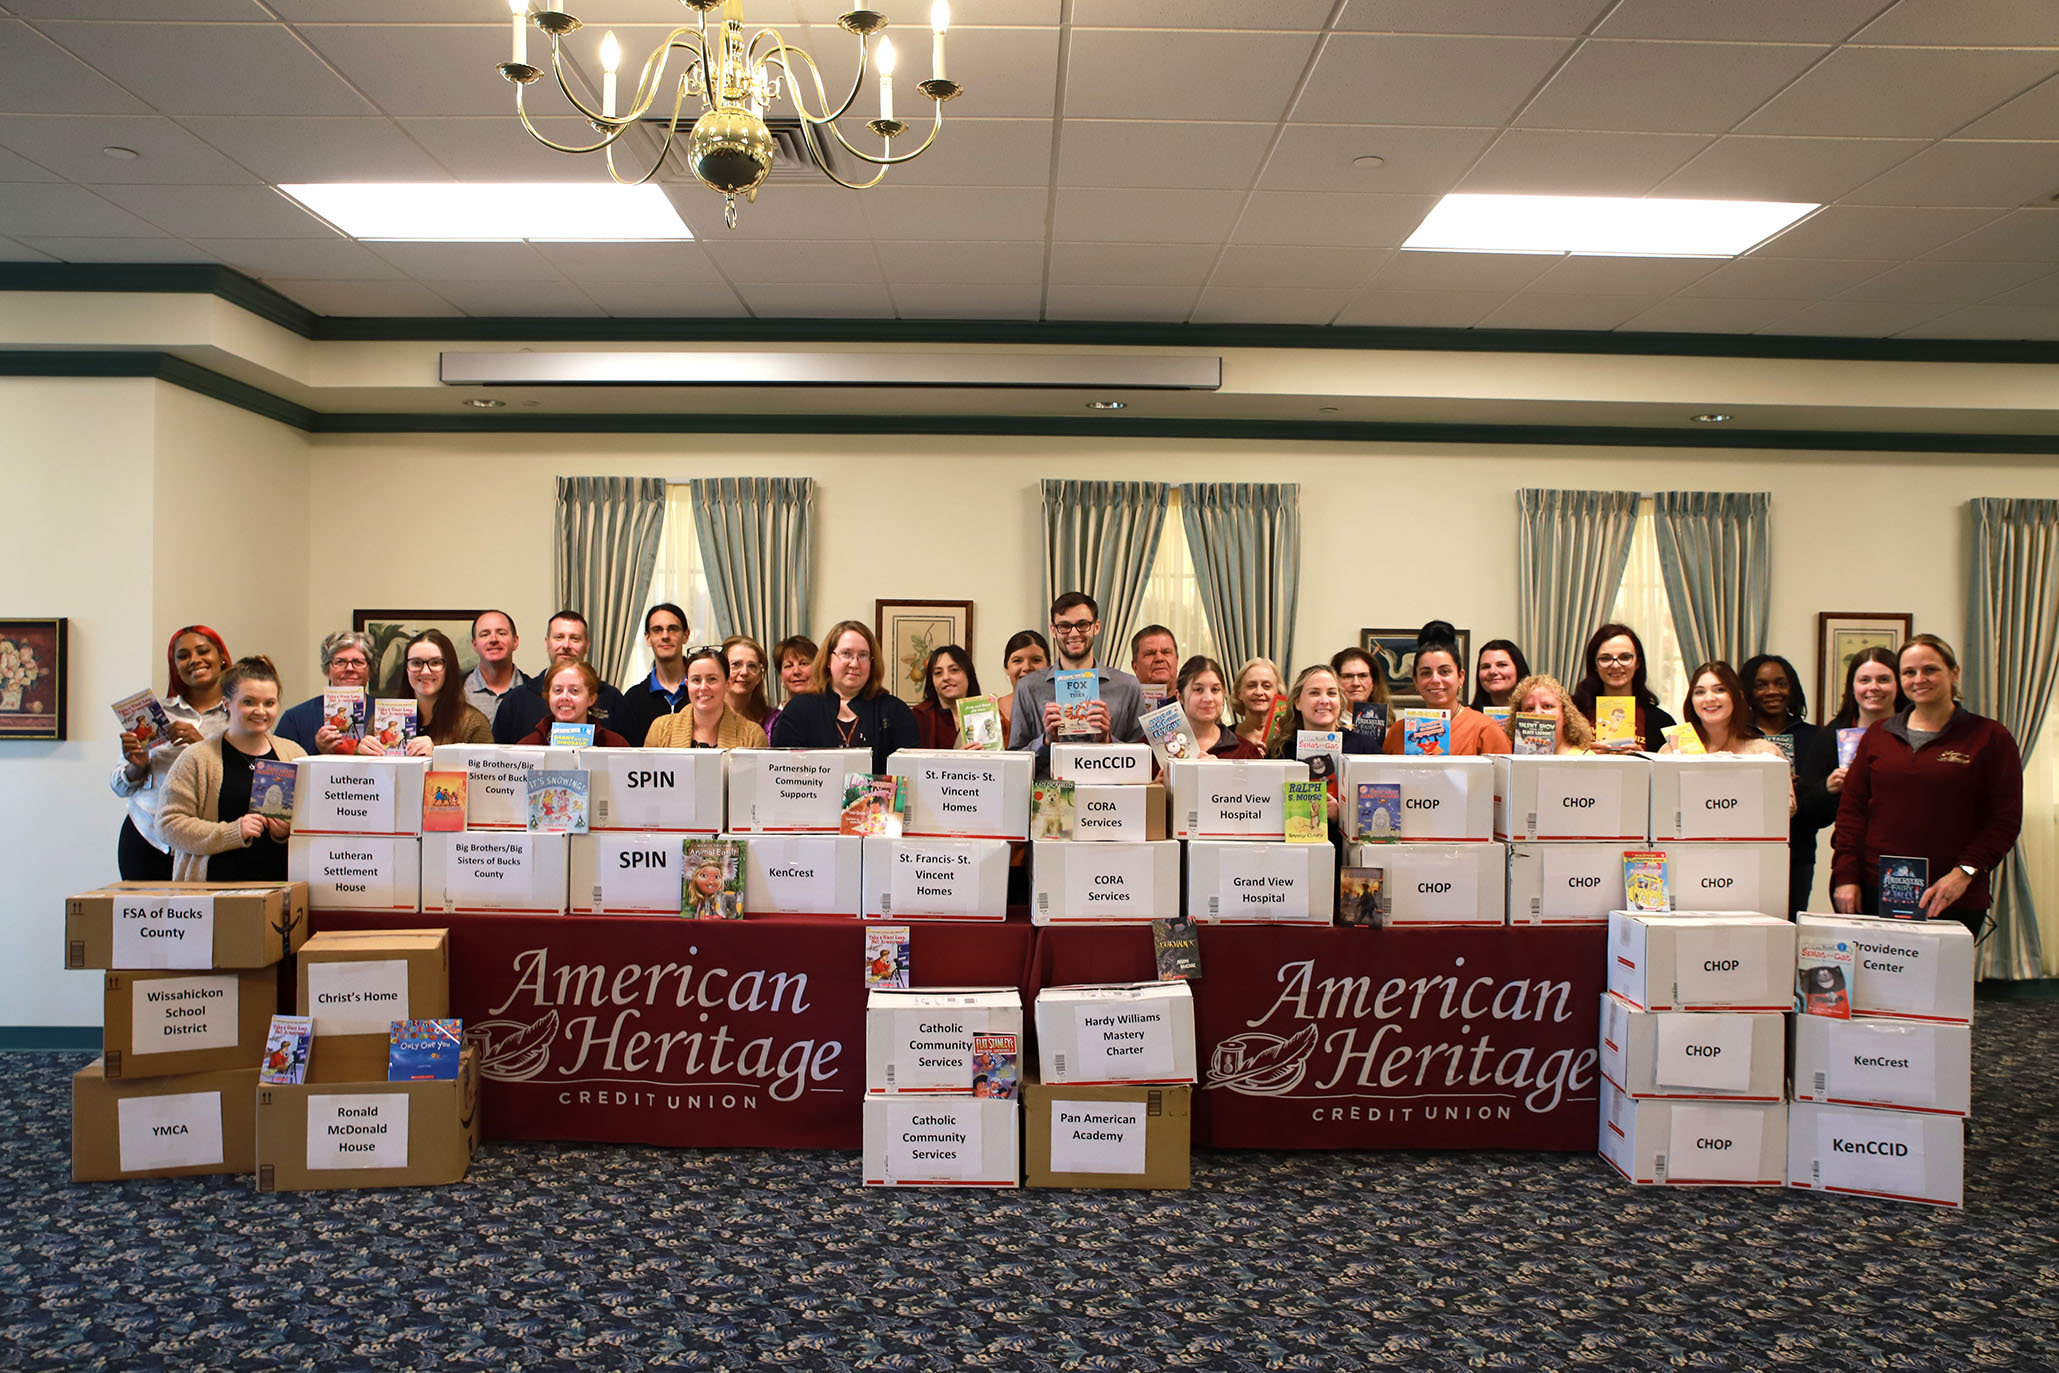 Volunteers stand behind boxes packed wit books to be donated to local pediatric organizations and hospitals.